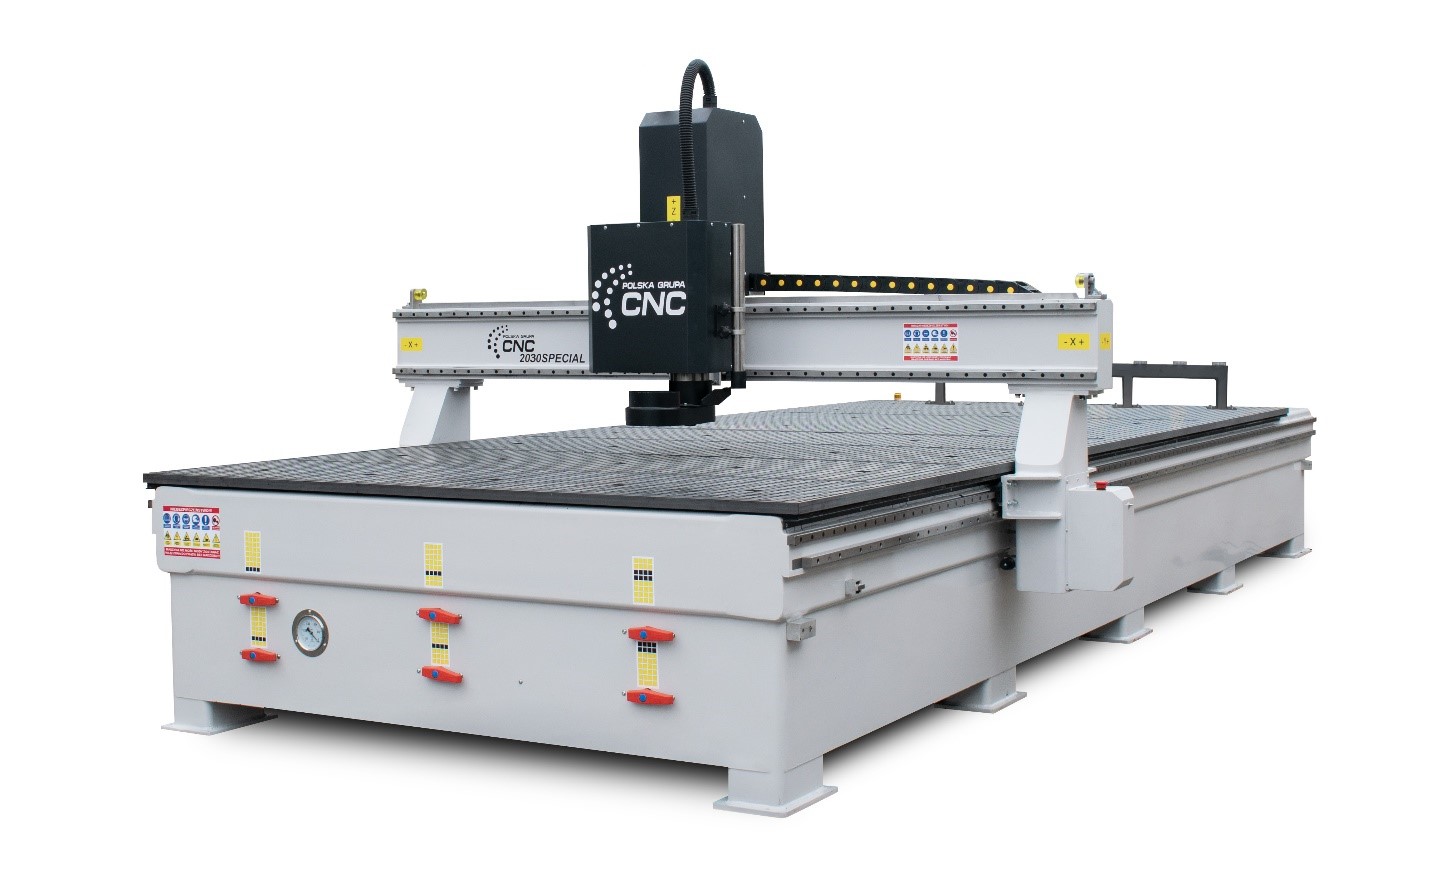 CNC router ATC 2040 Special